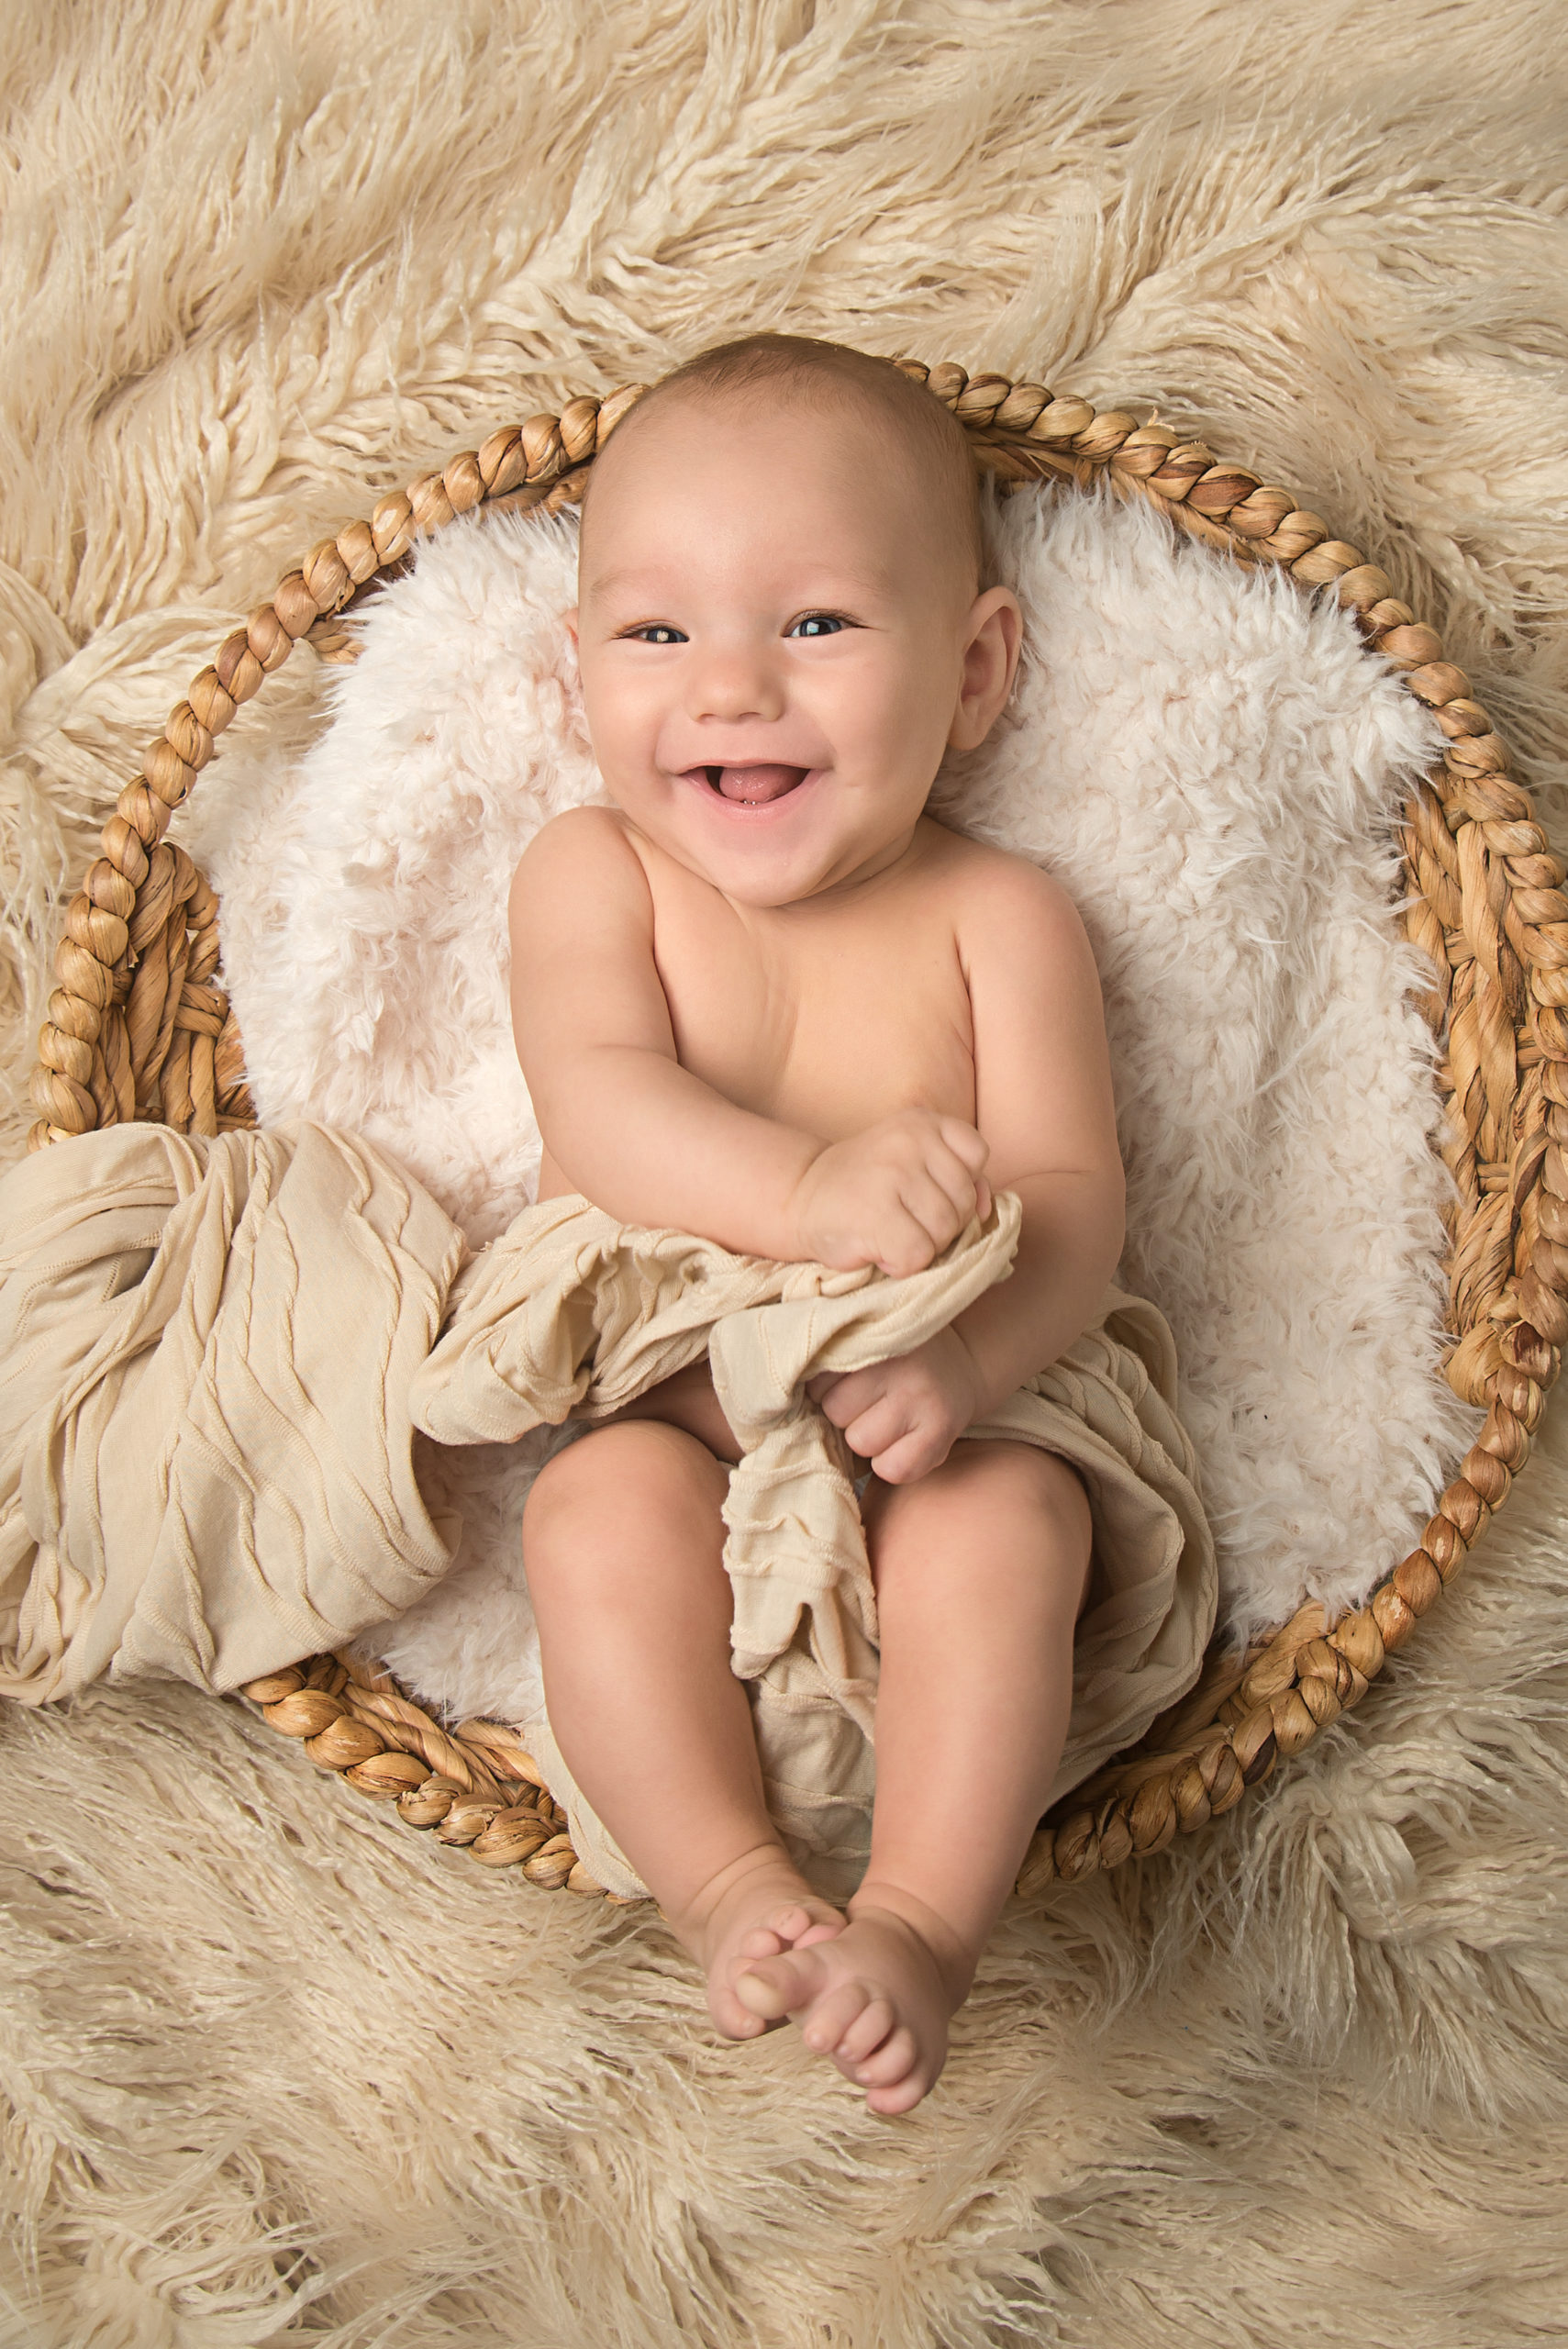 st-louis-photography-studio-milestone-session-three-month-old-boy-on-beige-with-big-smile.jpg